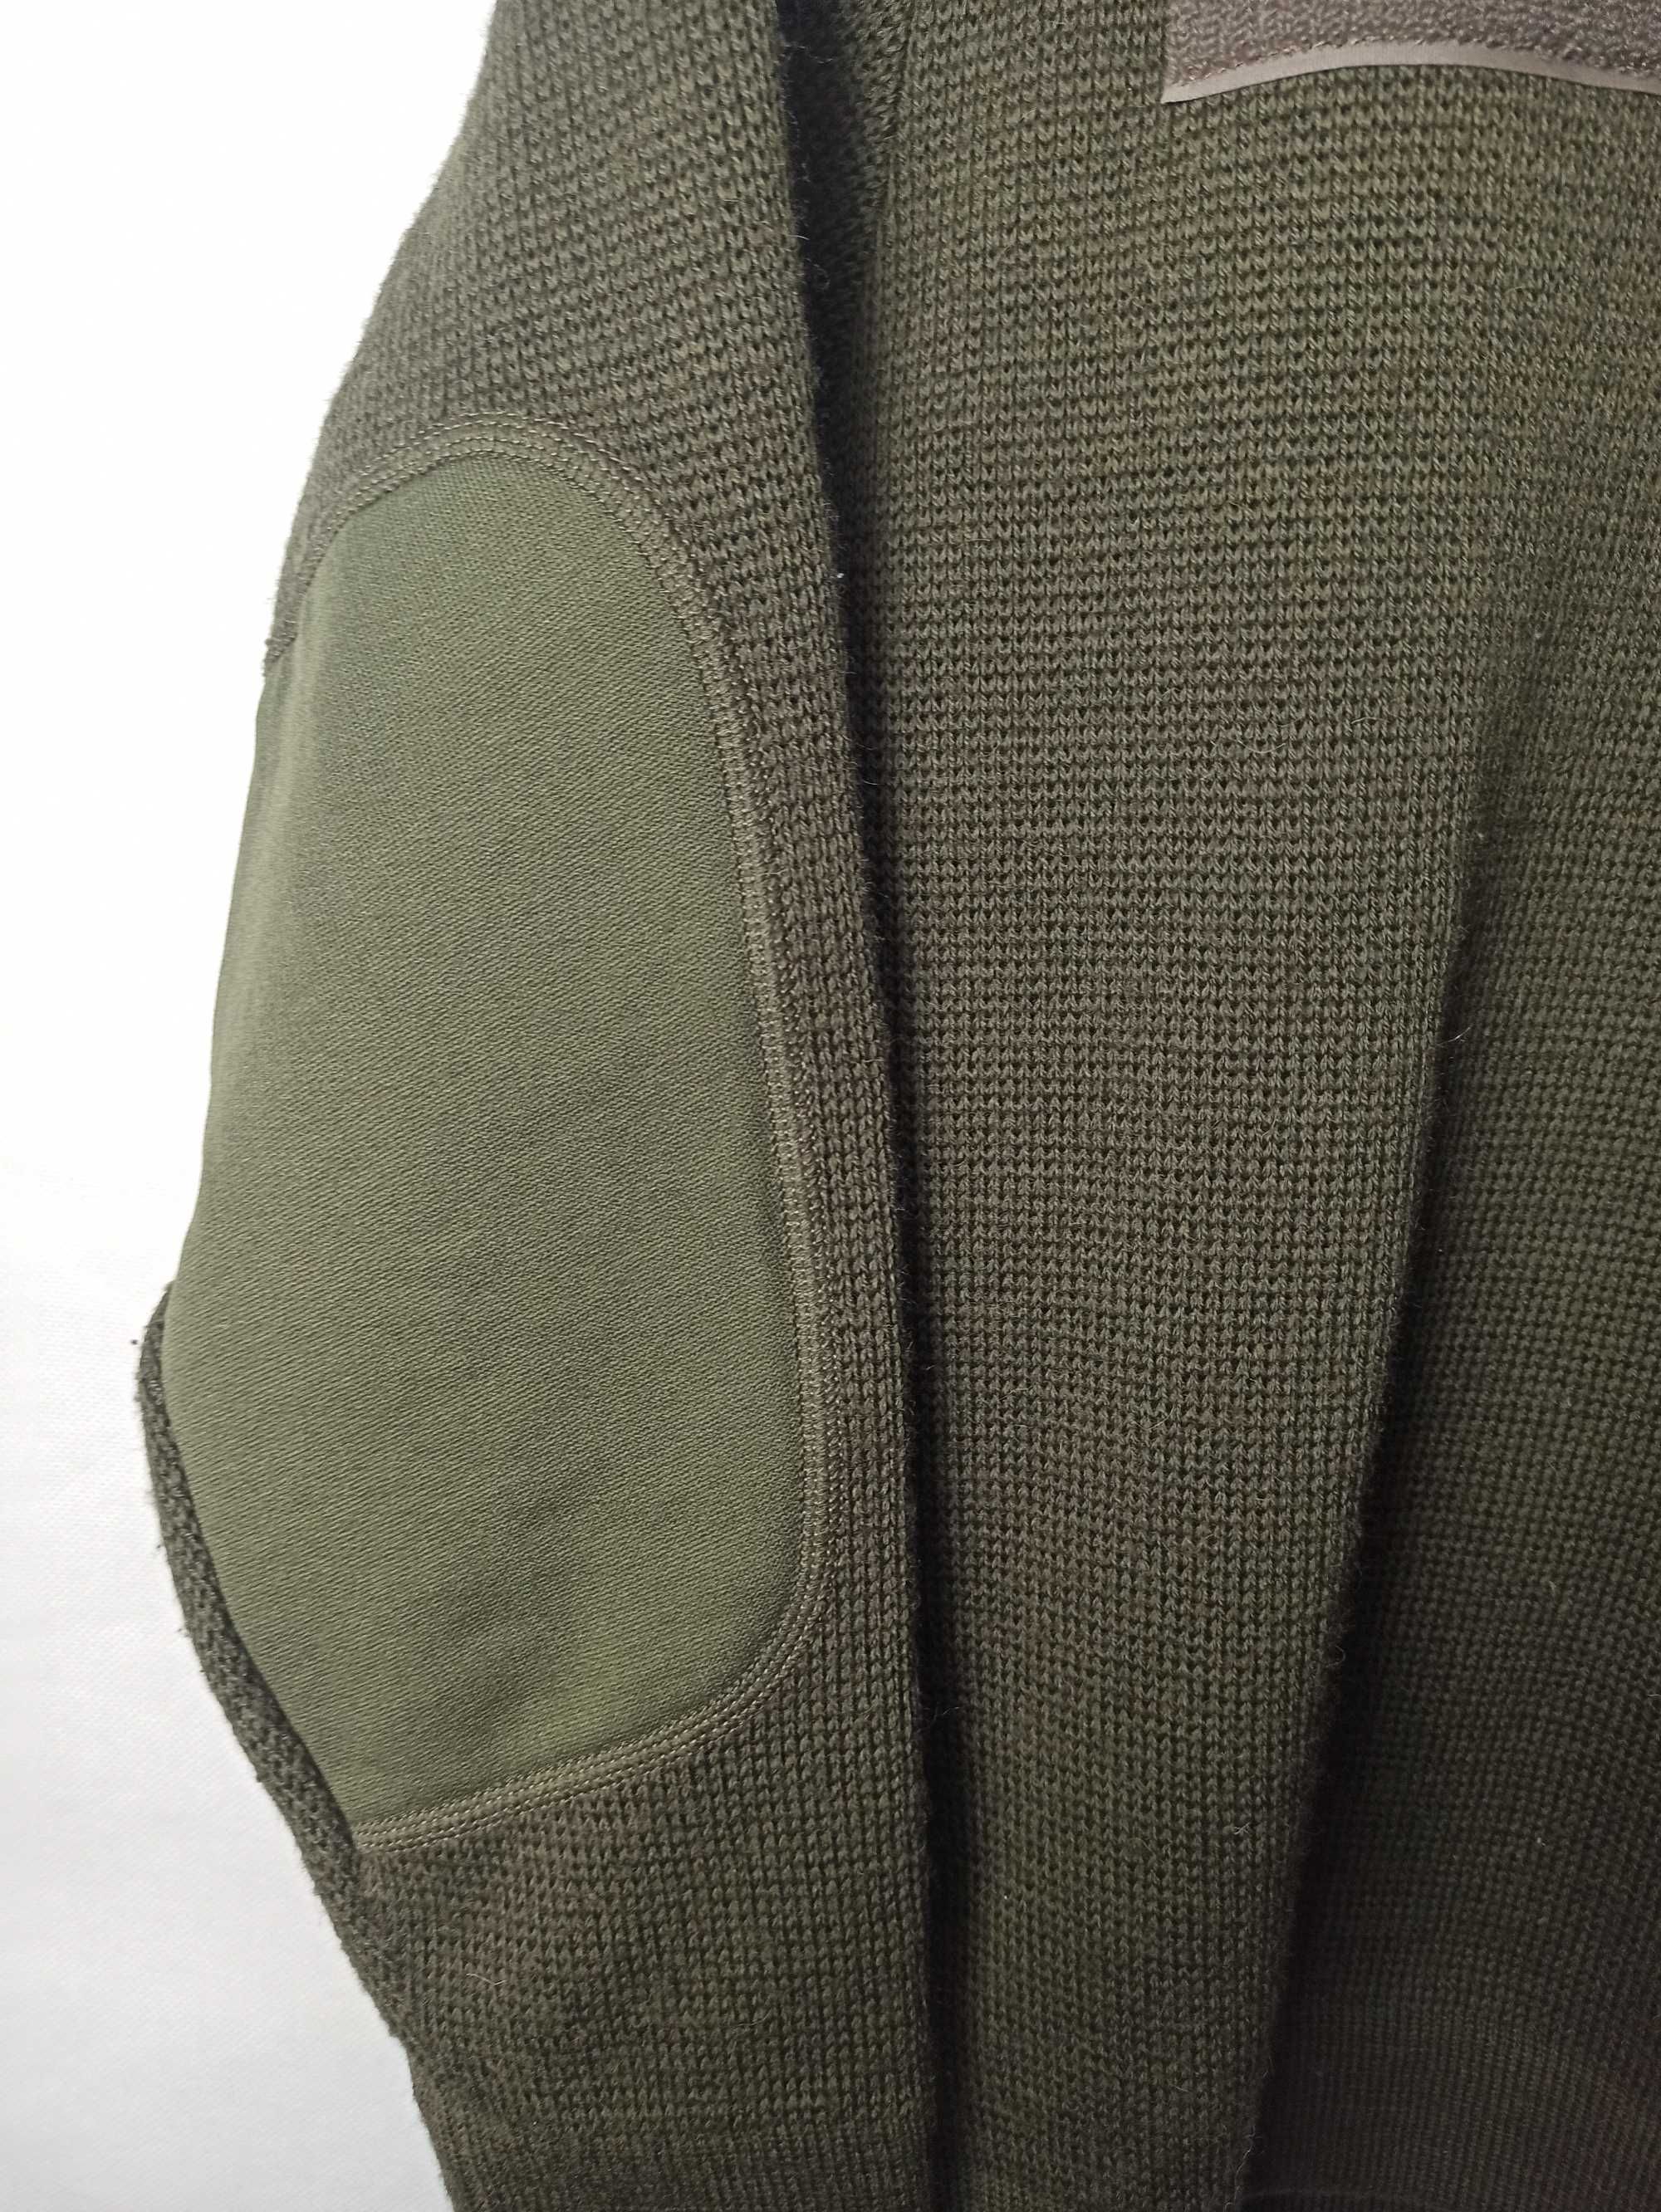 ST. James French Military 1992 Jacket Vintage